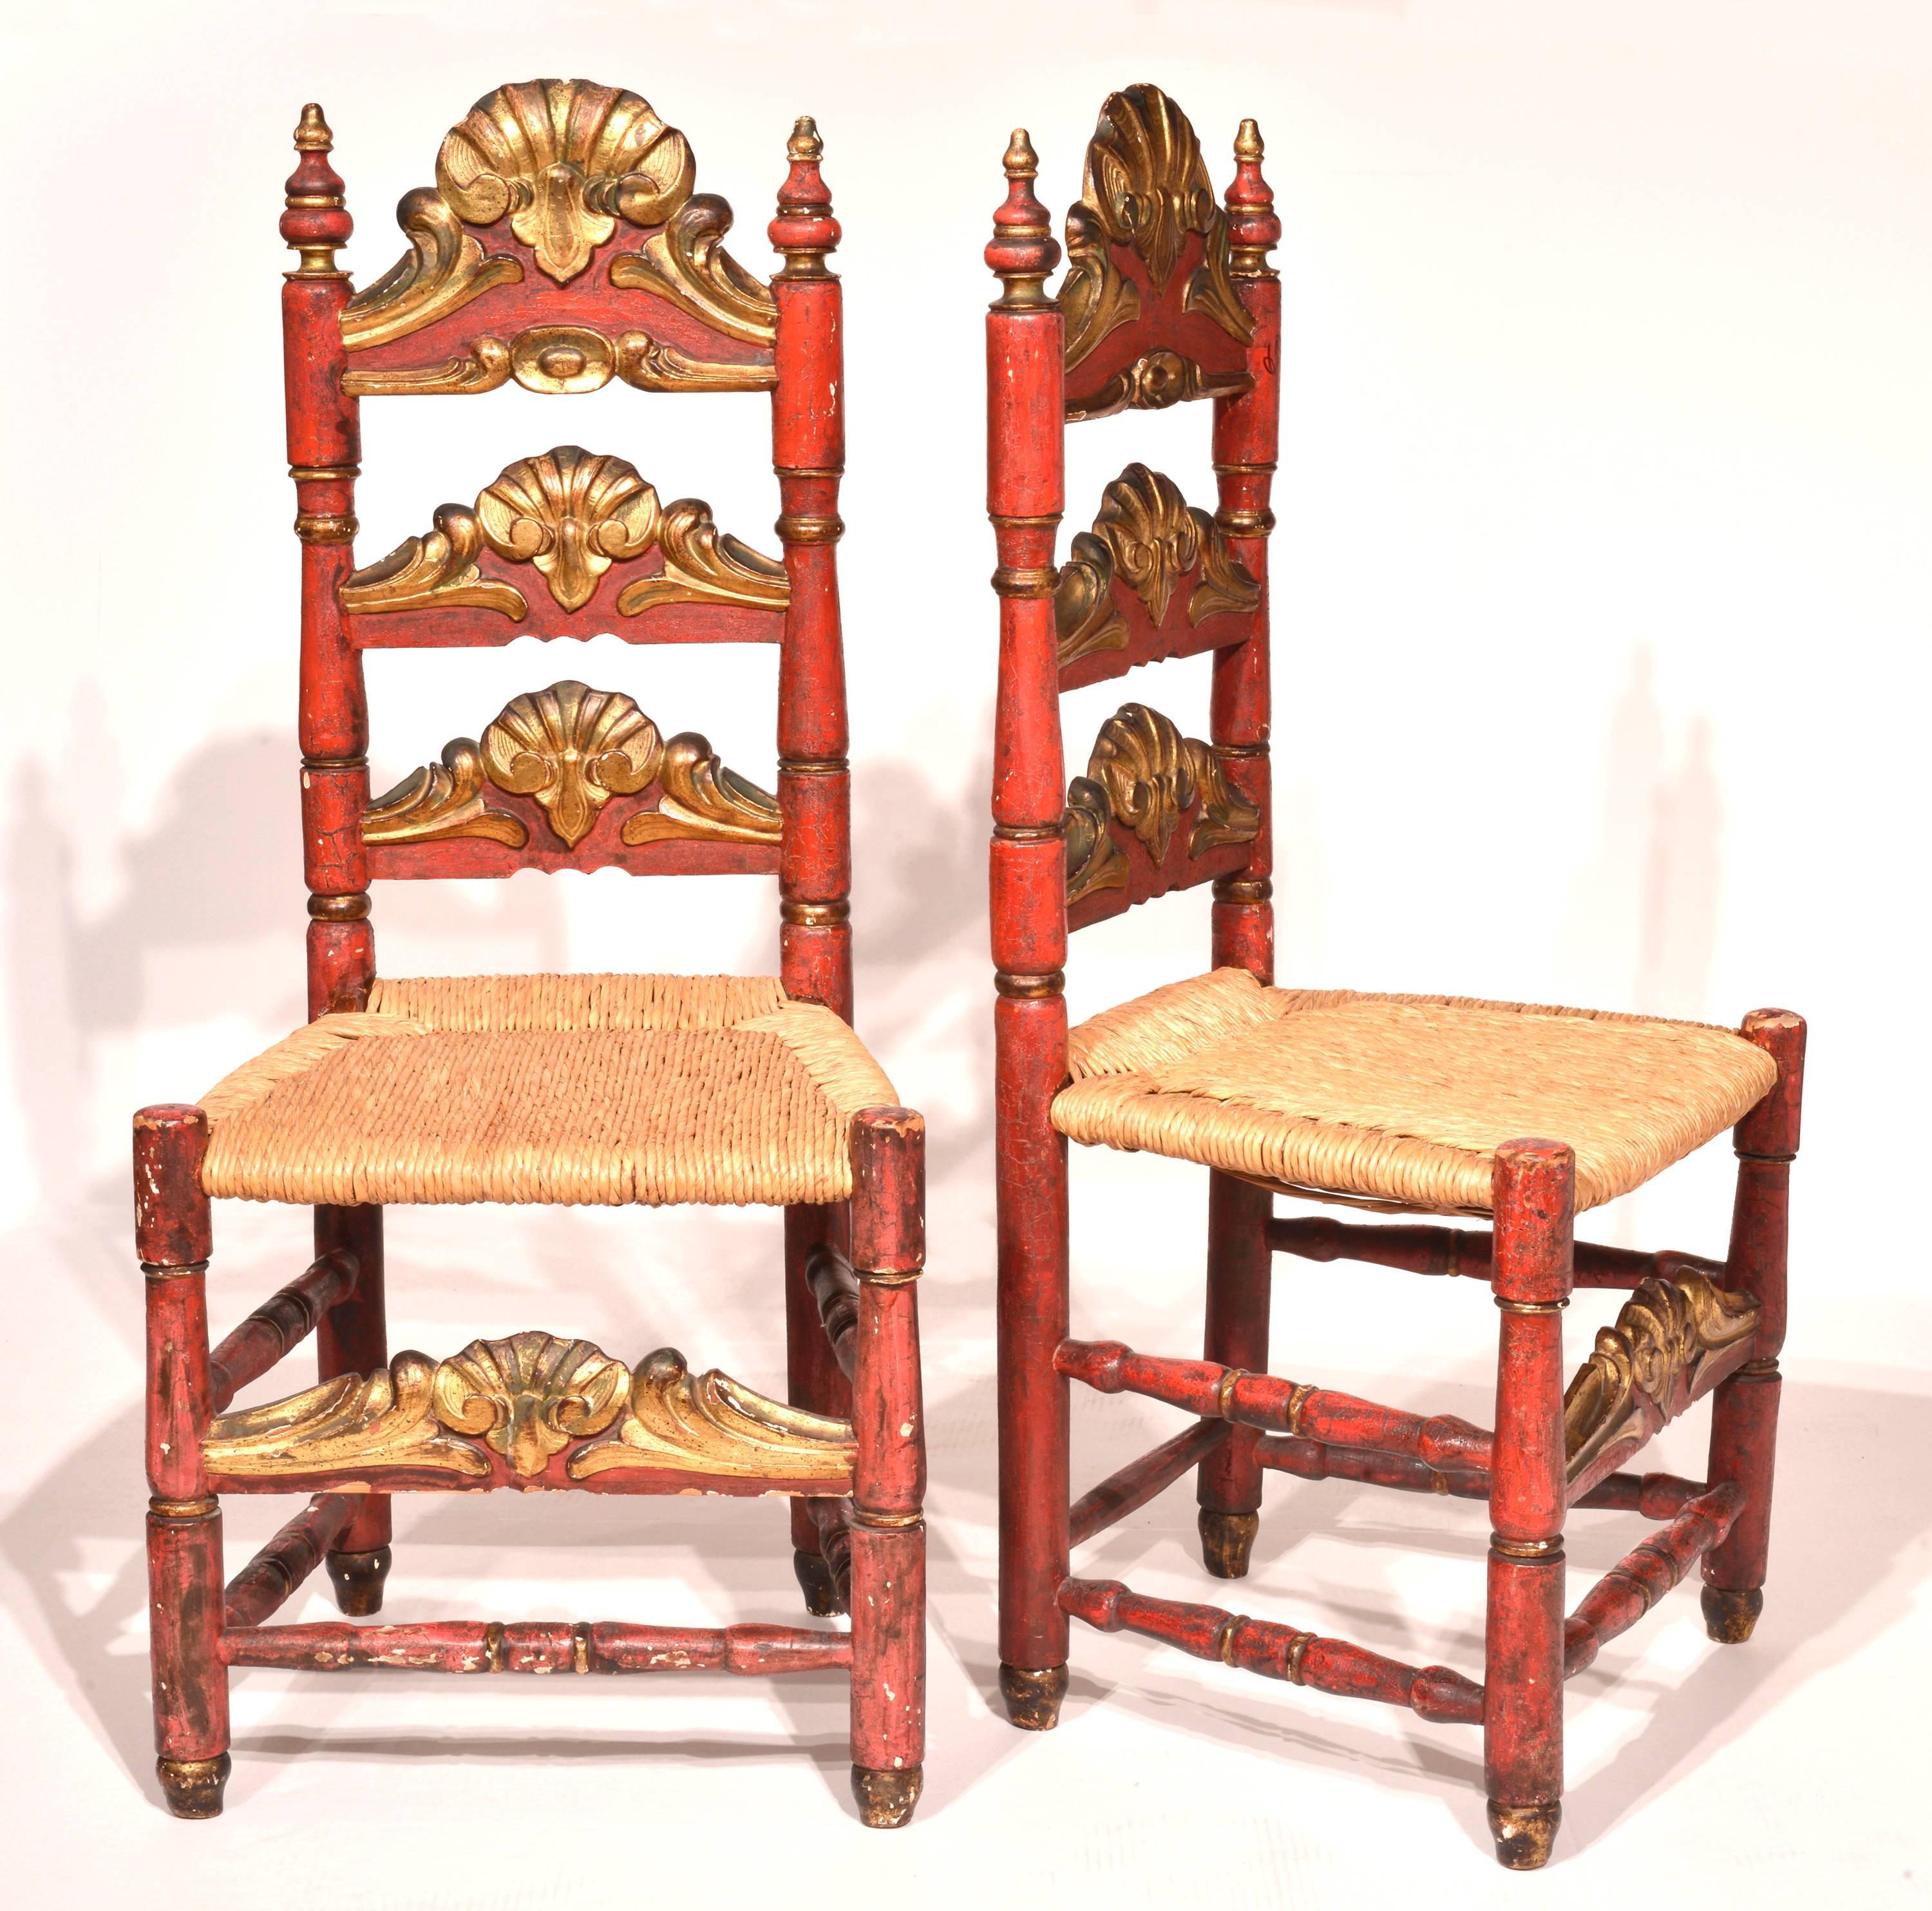 Chair dimensions:
45 x 21 x 18 inches.

Provenance:
Private Collection, Mooresville, NC.